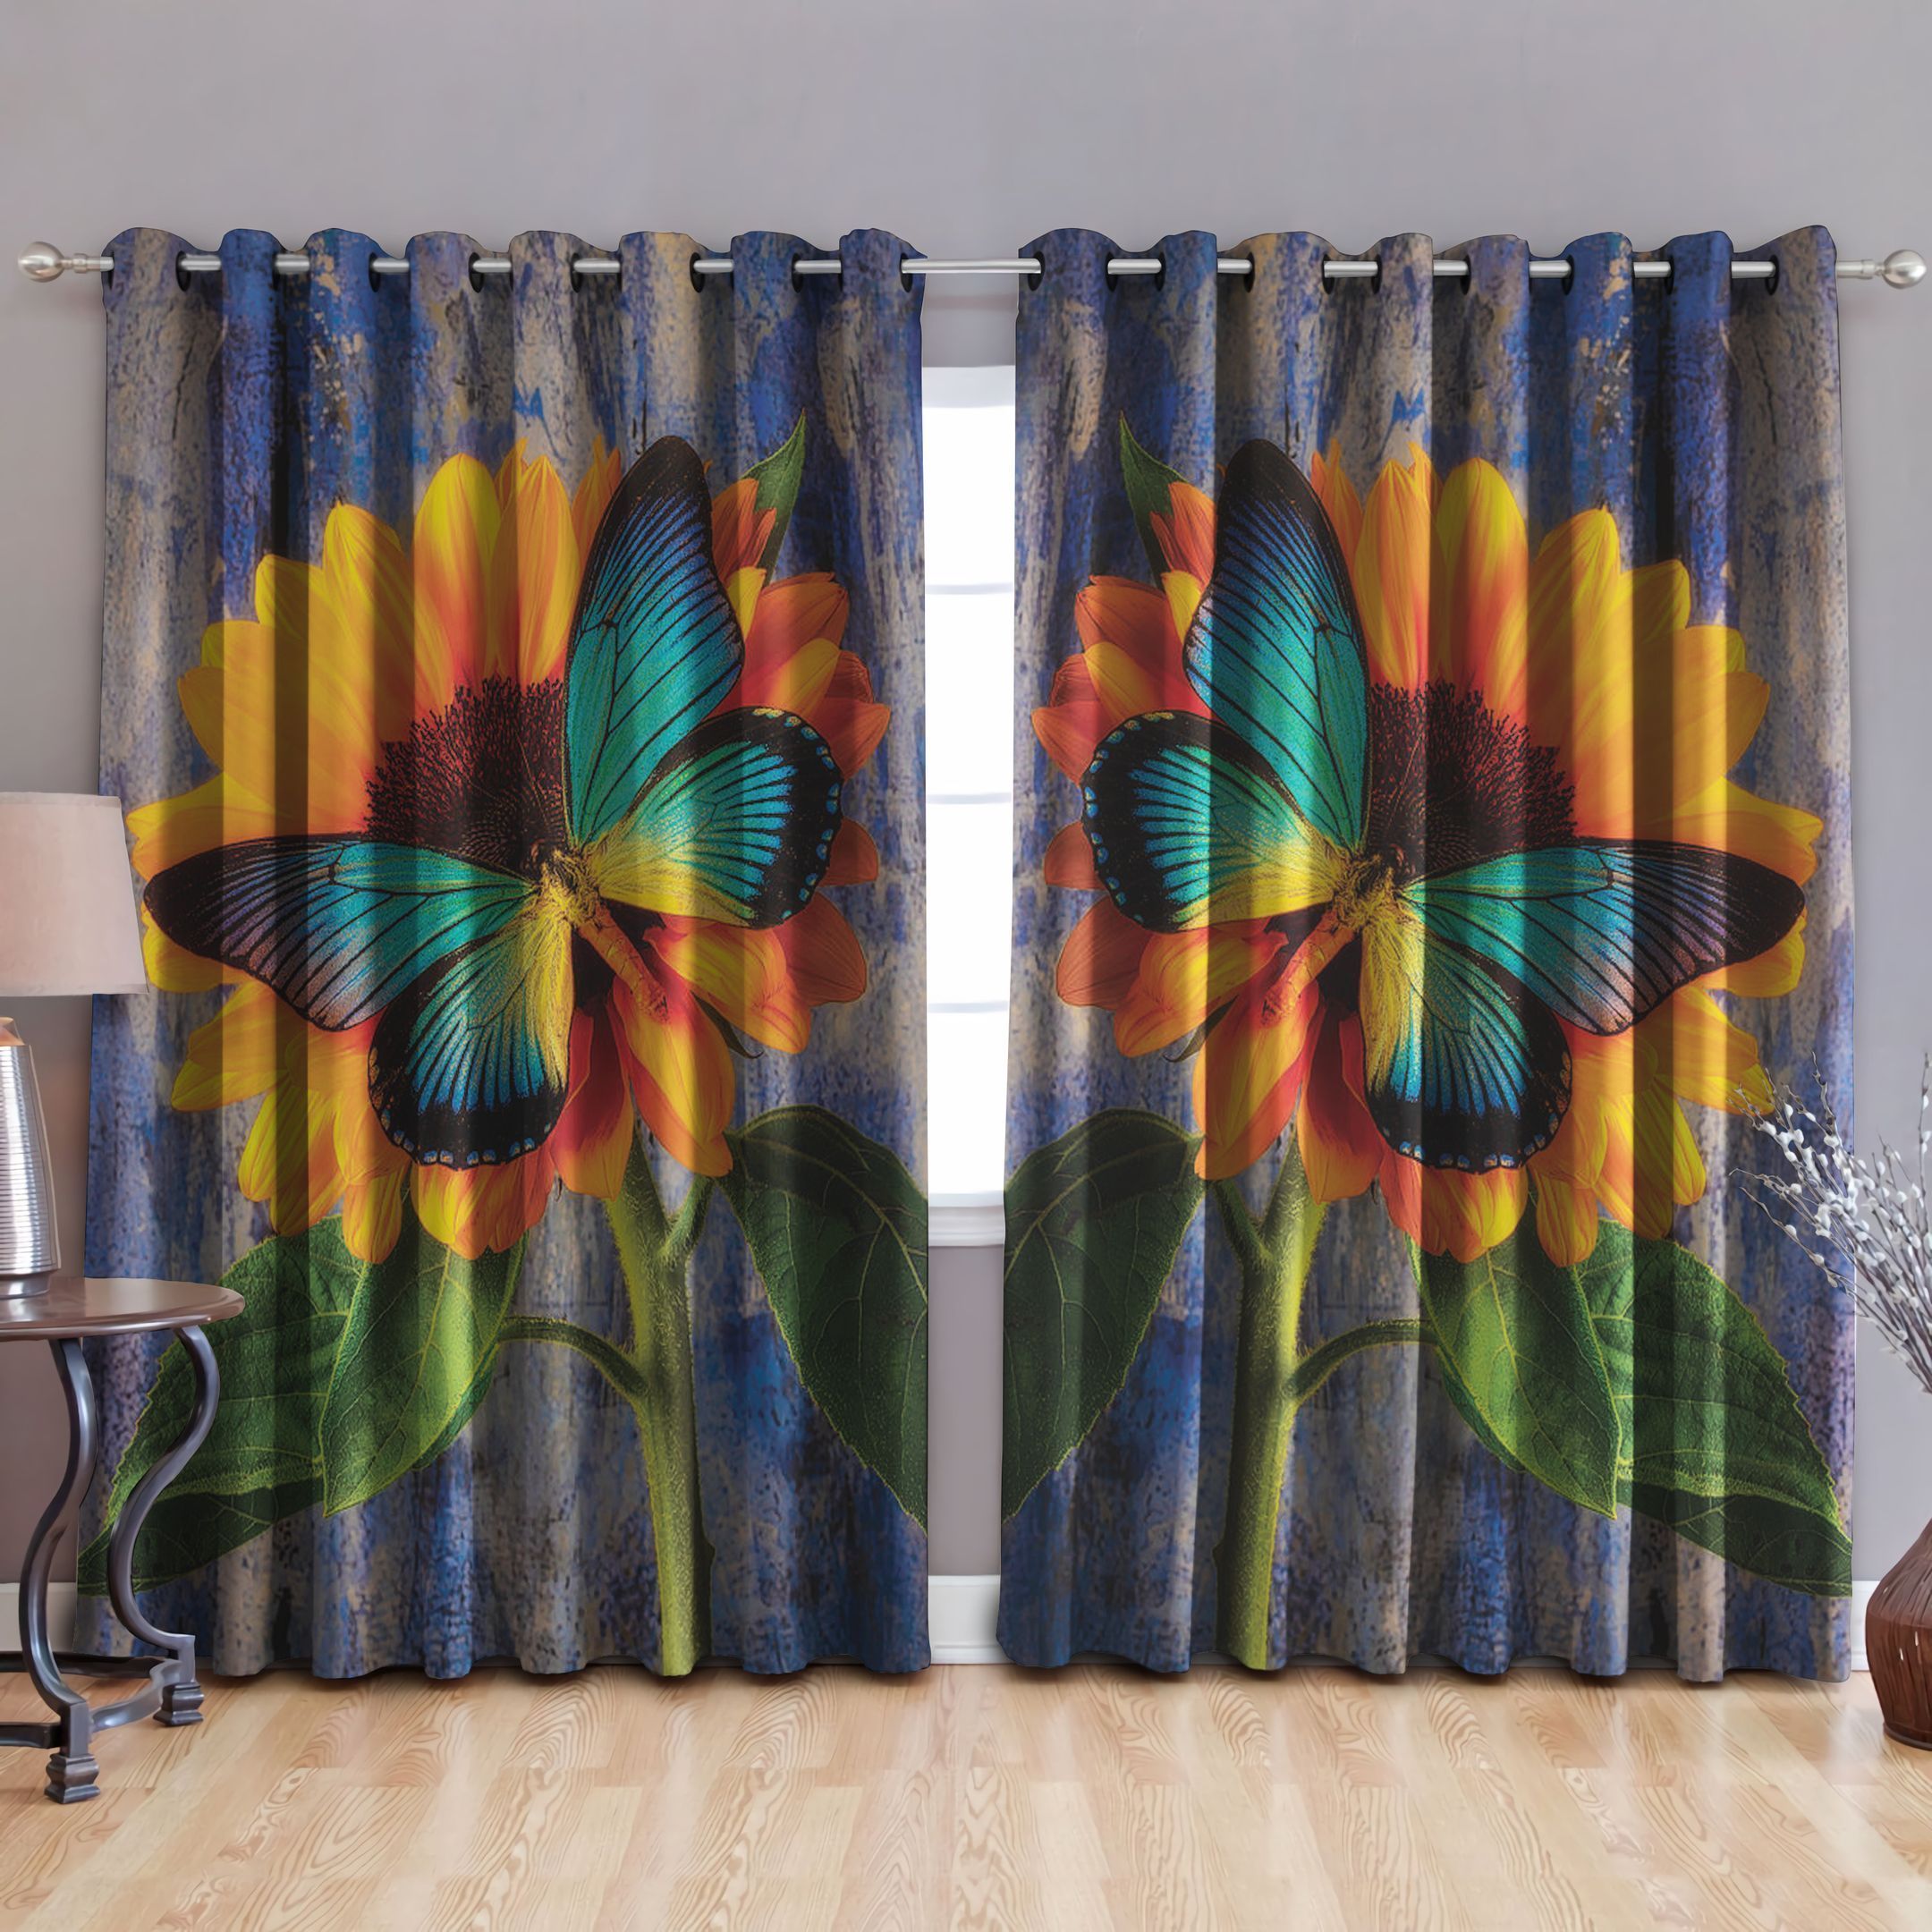 Awesome Butterfly Sunflowers Printed Window Curtain Home Decor